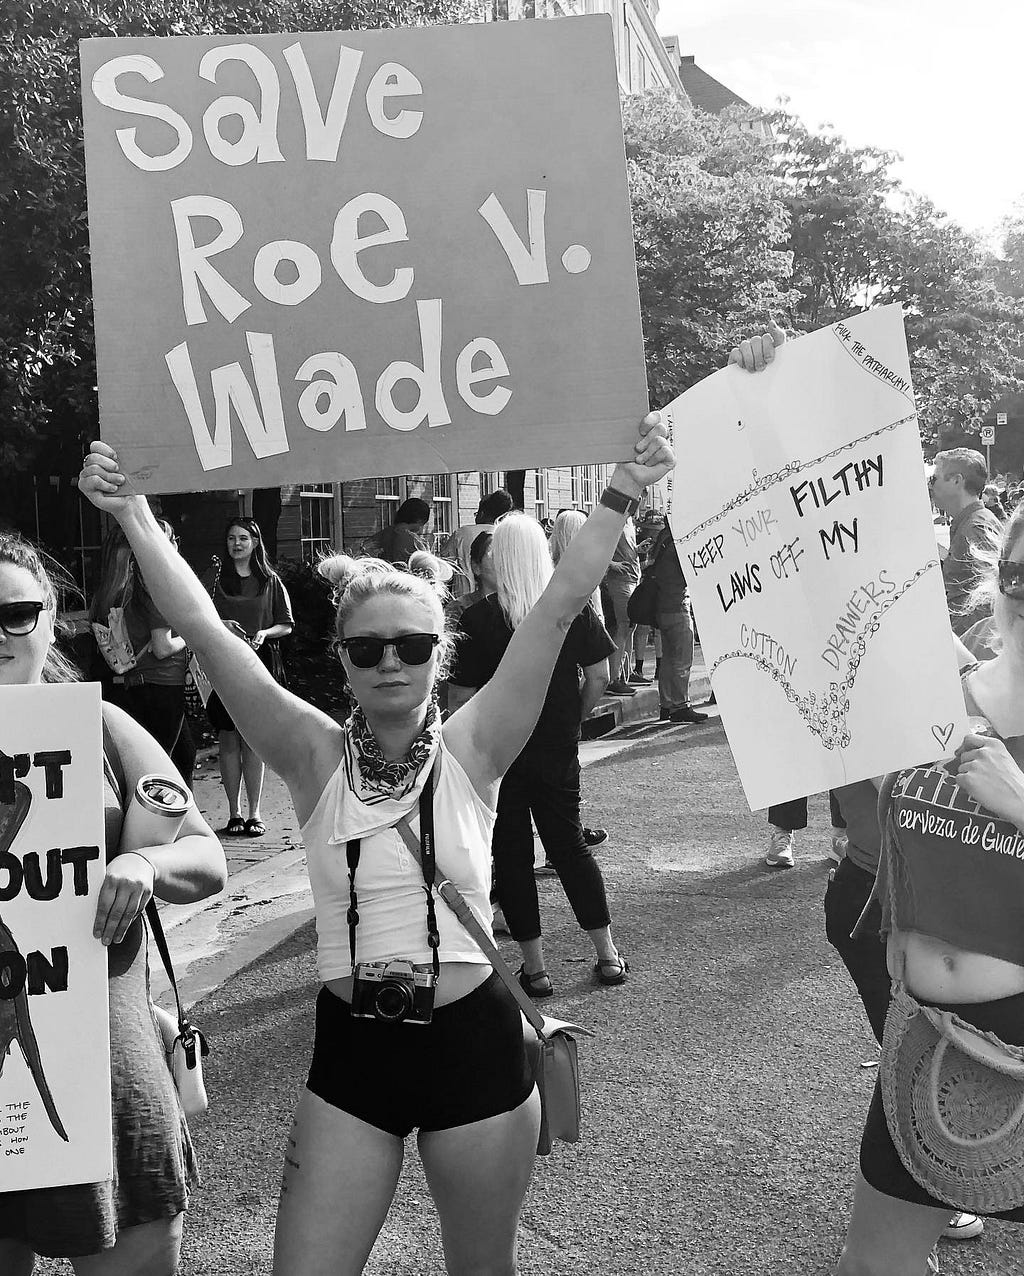 Someone holding a ‘Save Roe v. Wade’ sign at a protest